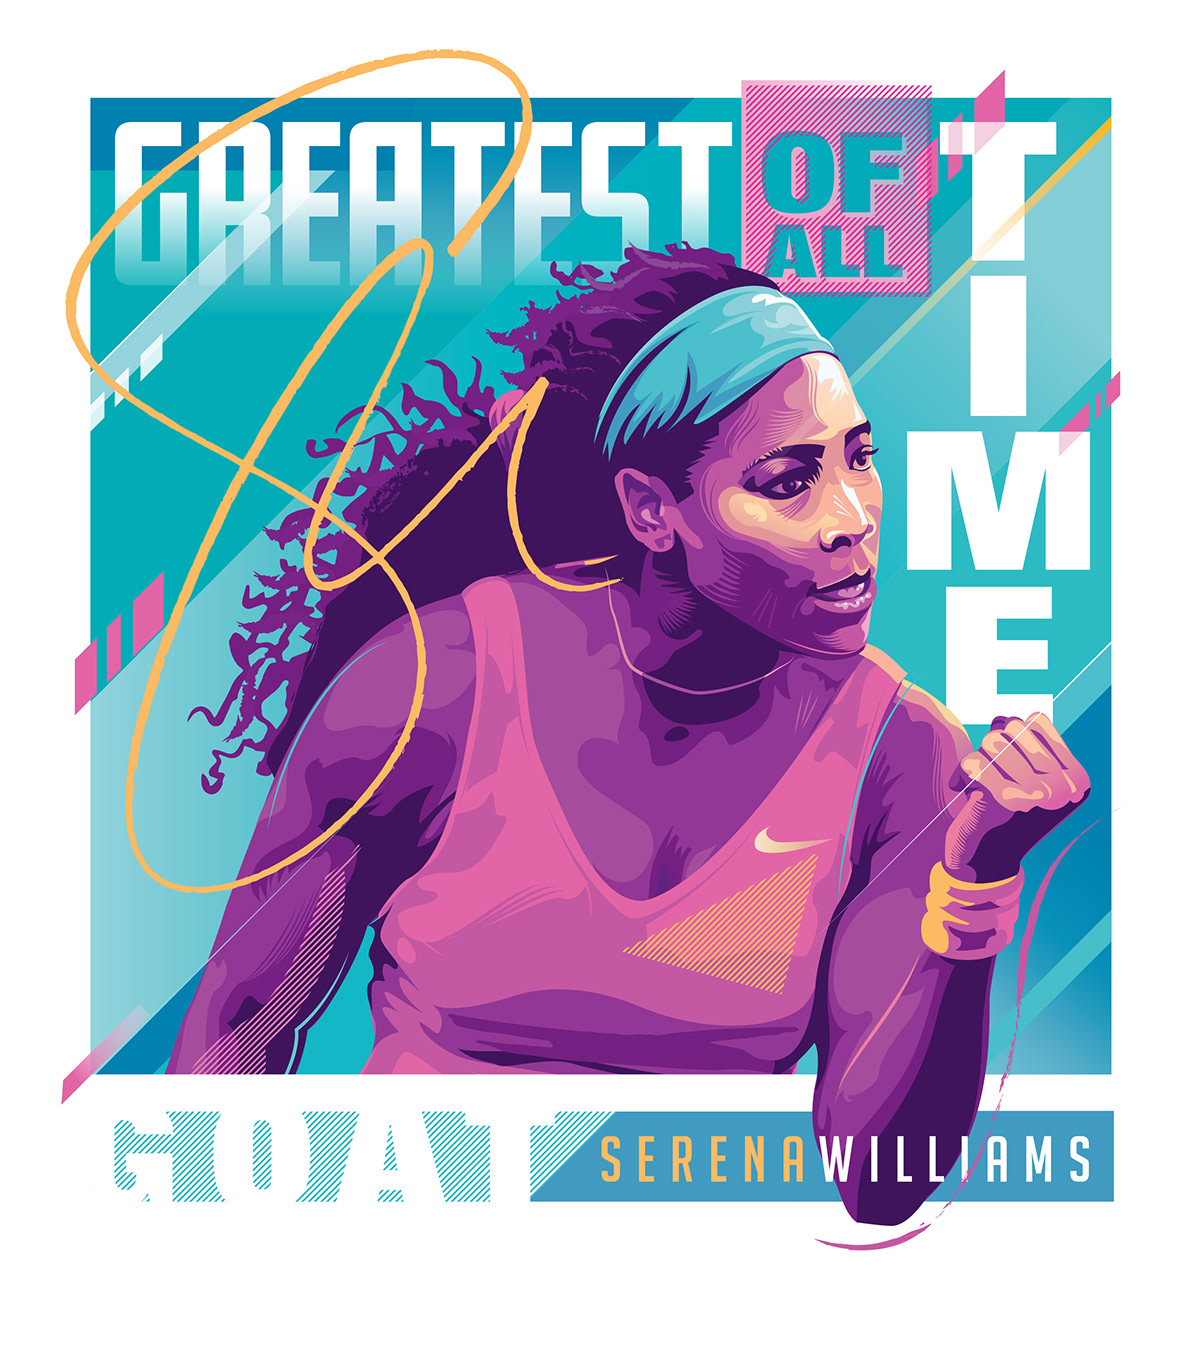 muhammad ali Serena Williams LeBron James roger federer portraits tennis basketball Boxing G.O.A.T. Greatest Of All